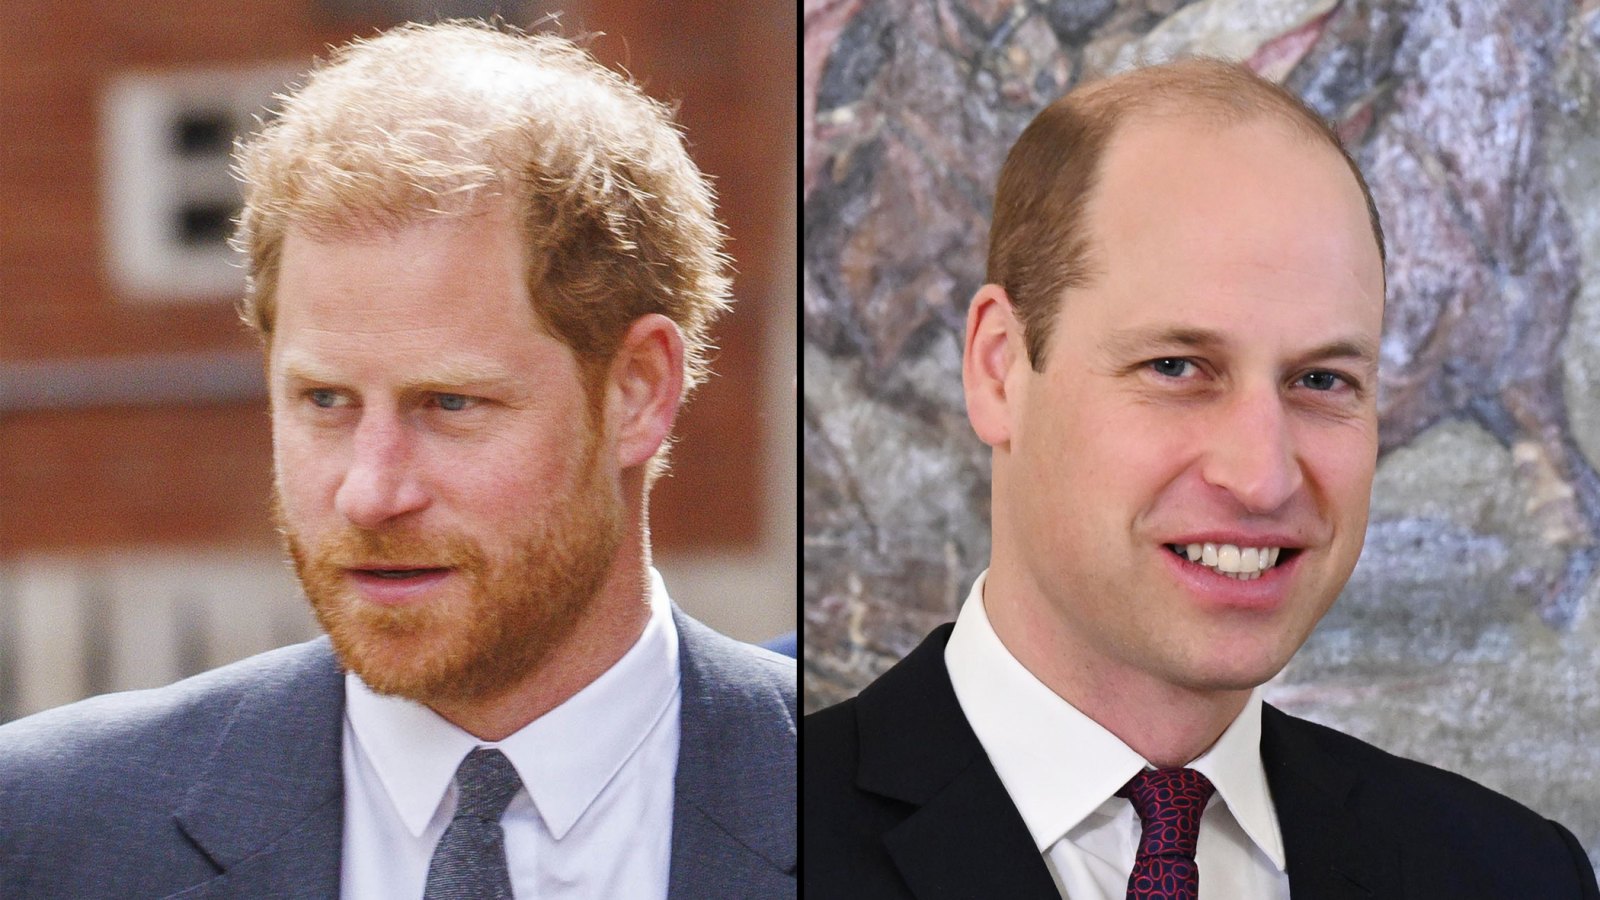 Prince Harry Claims William Received Very Large Sum in Phone Hacking Case